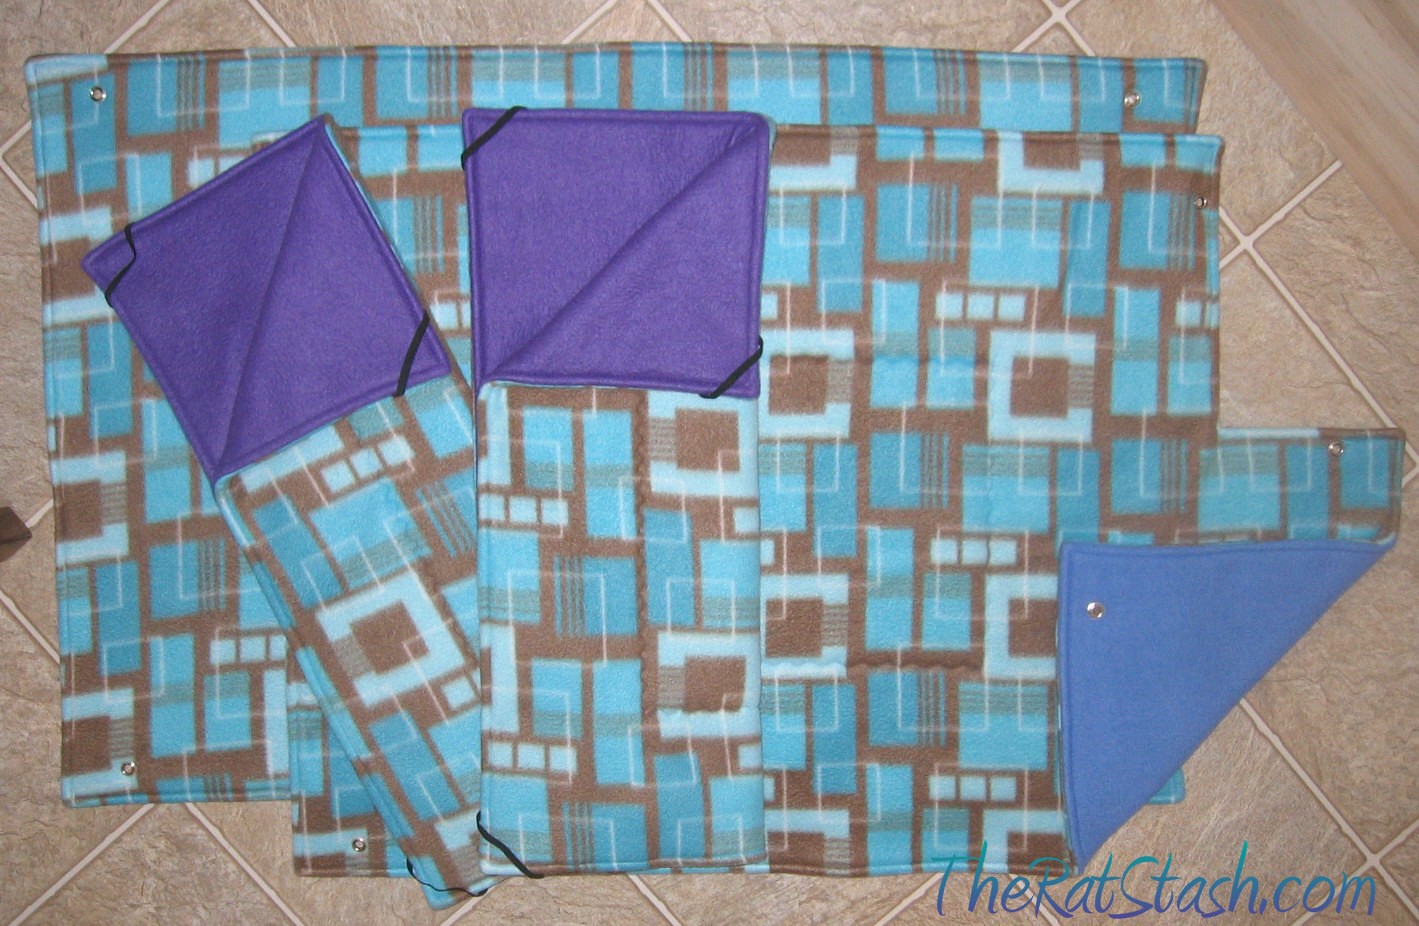 For Jennifer K: Double FN/CN Cage Liners w/ fleece padding